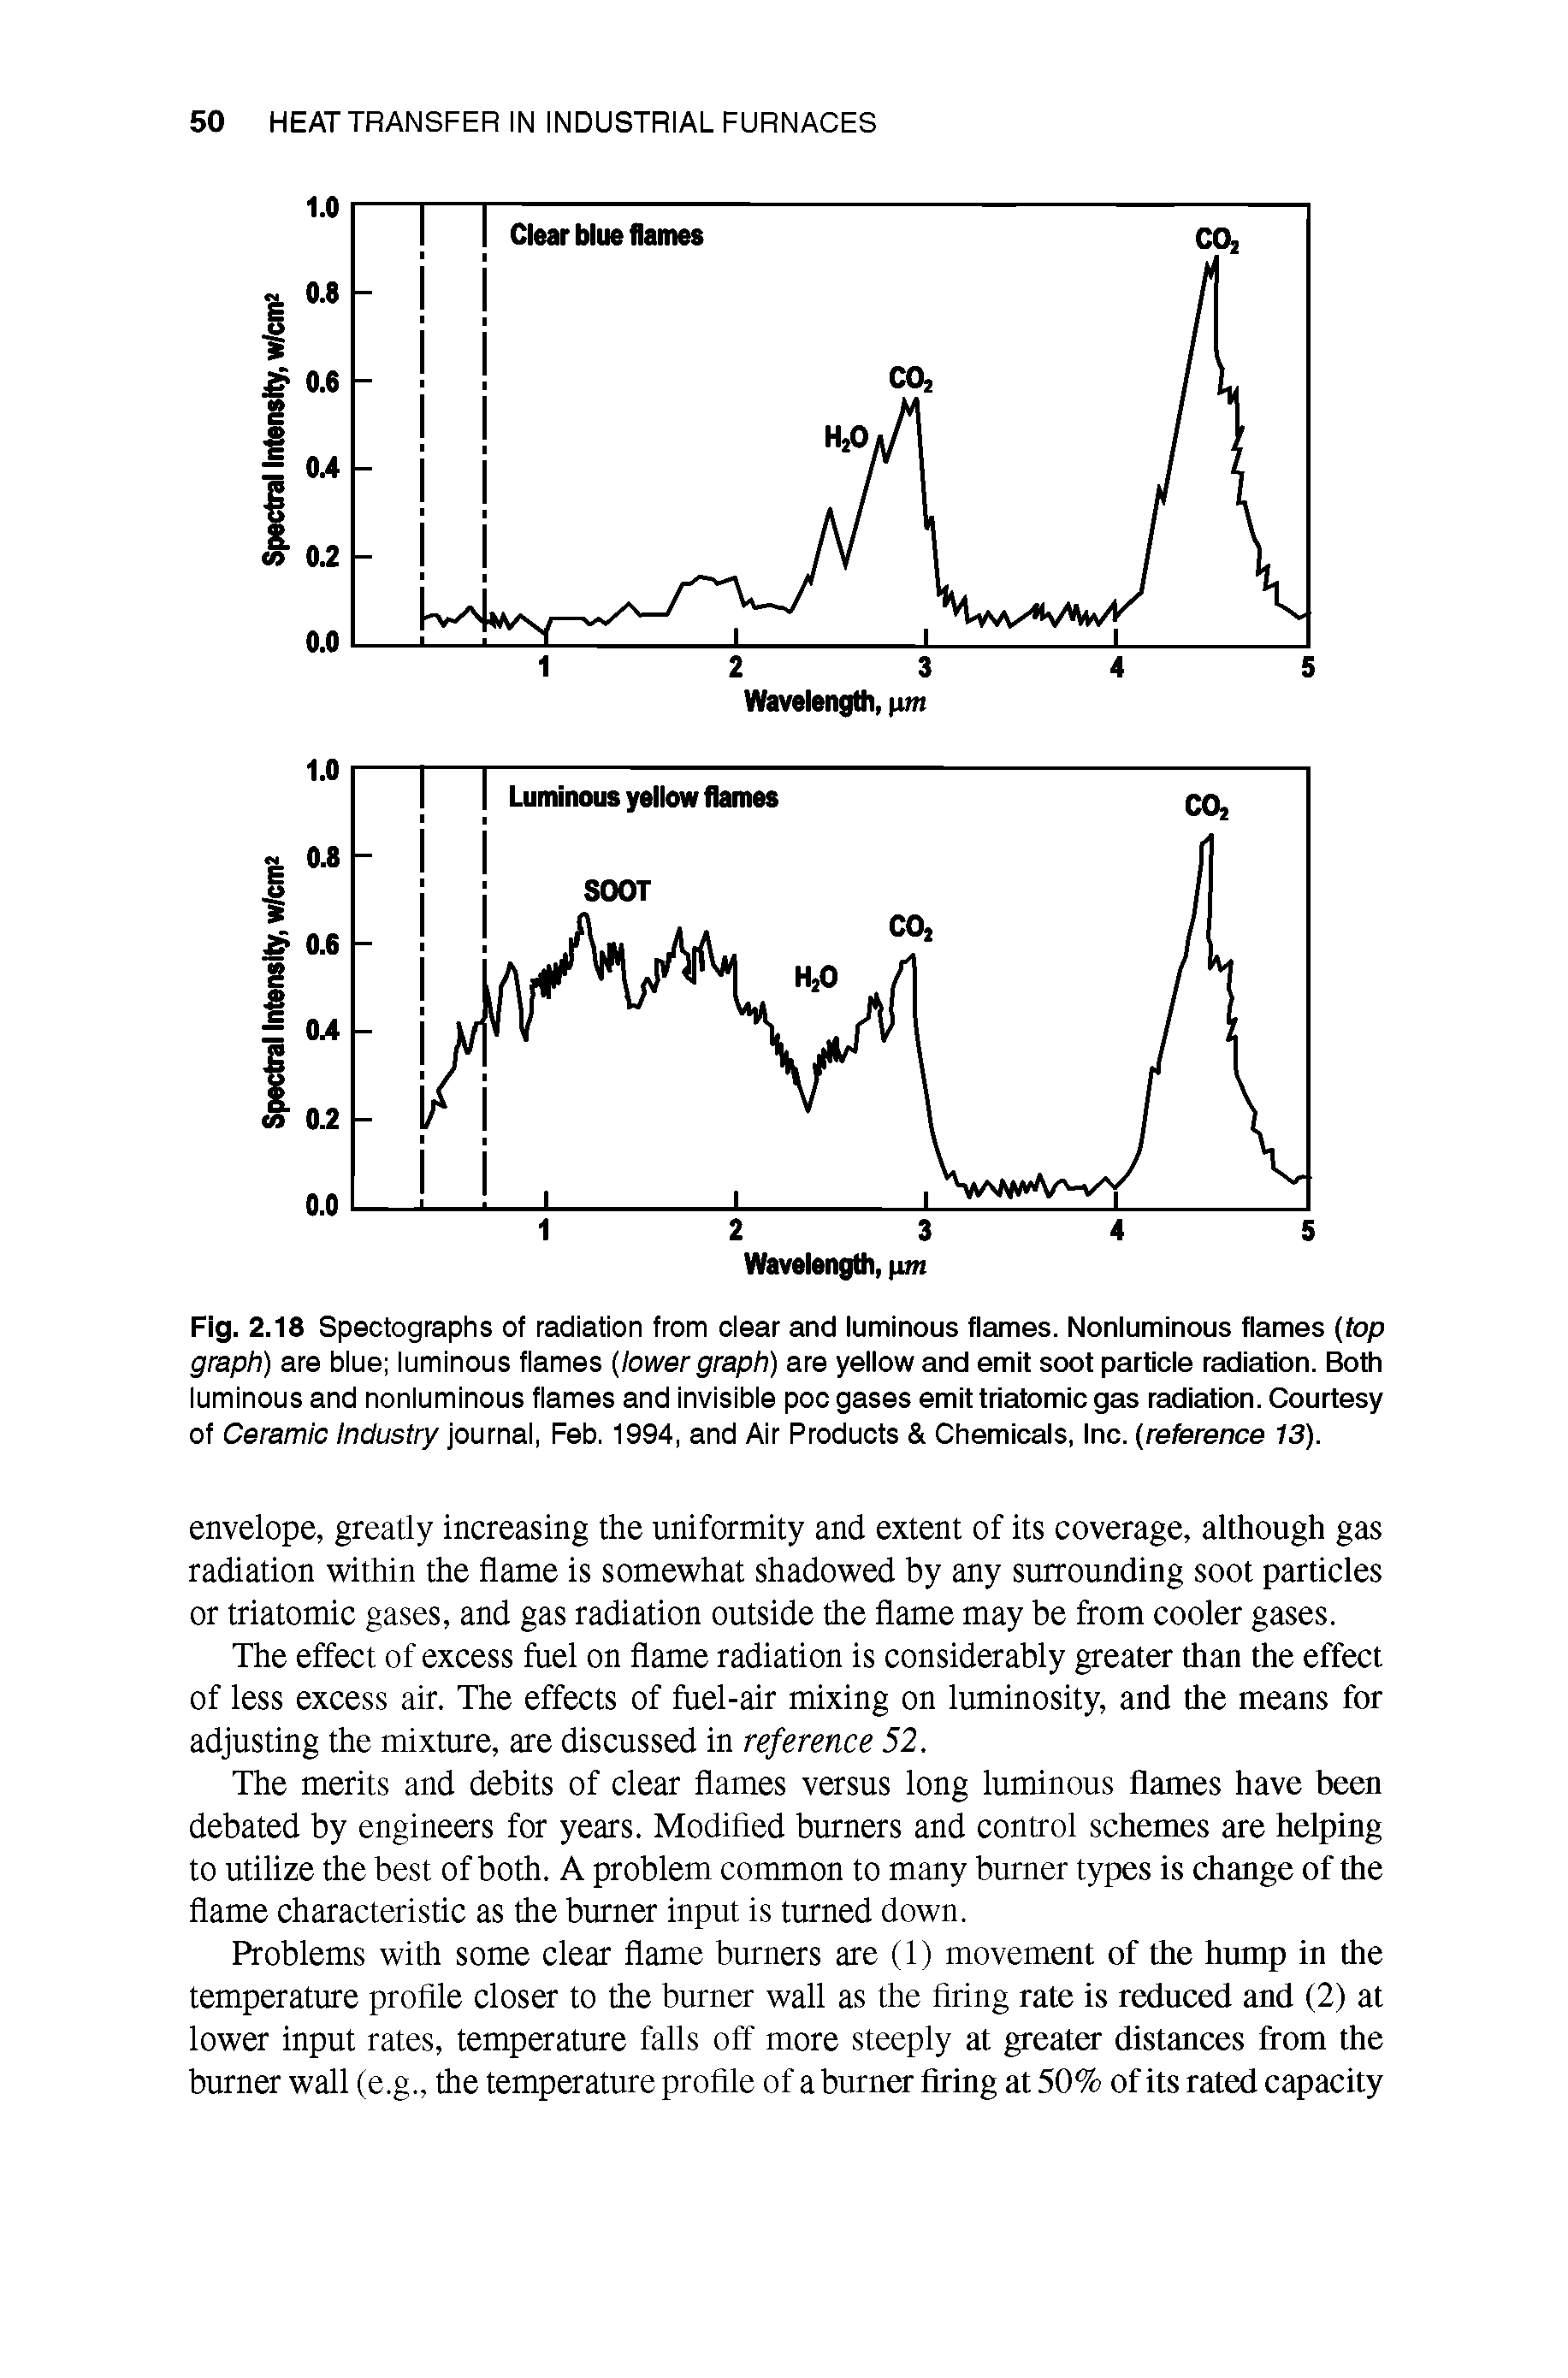 Fig. 2.18 Spectographs of radiation from ciear and luminous flames. Nonlumlnous flames top graph) are blue luminous flames lower graph) are yellow and emit soot particle radiation. Both luminous and nonlumlnous flames and Invisible poo gases emit triatomic gas radiation. Courtesy of Ceramic Industry journal, Feb. 1994, and Air Products Chemicals, Inc. reference 13).